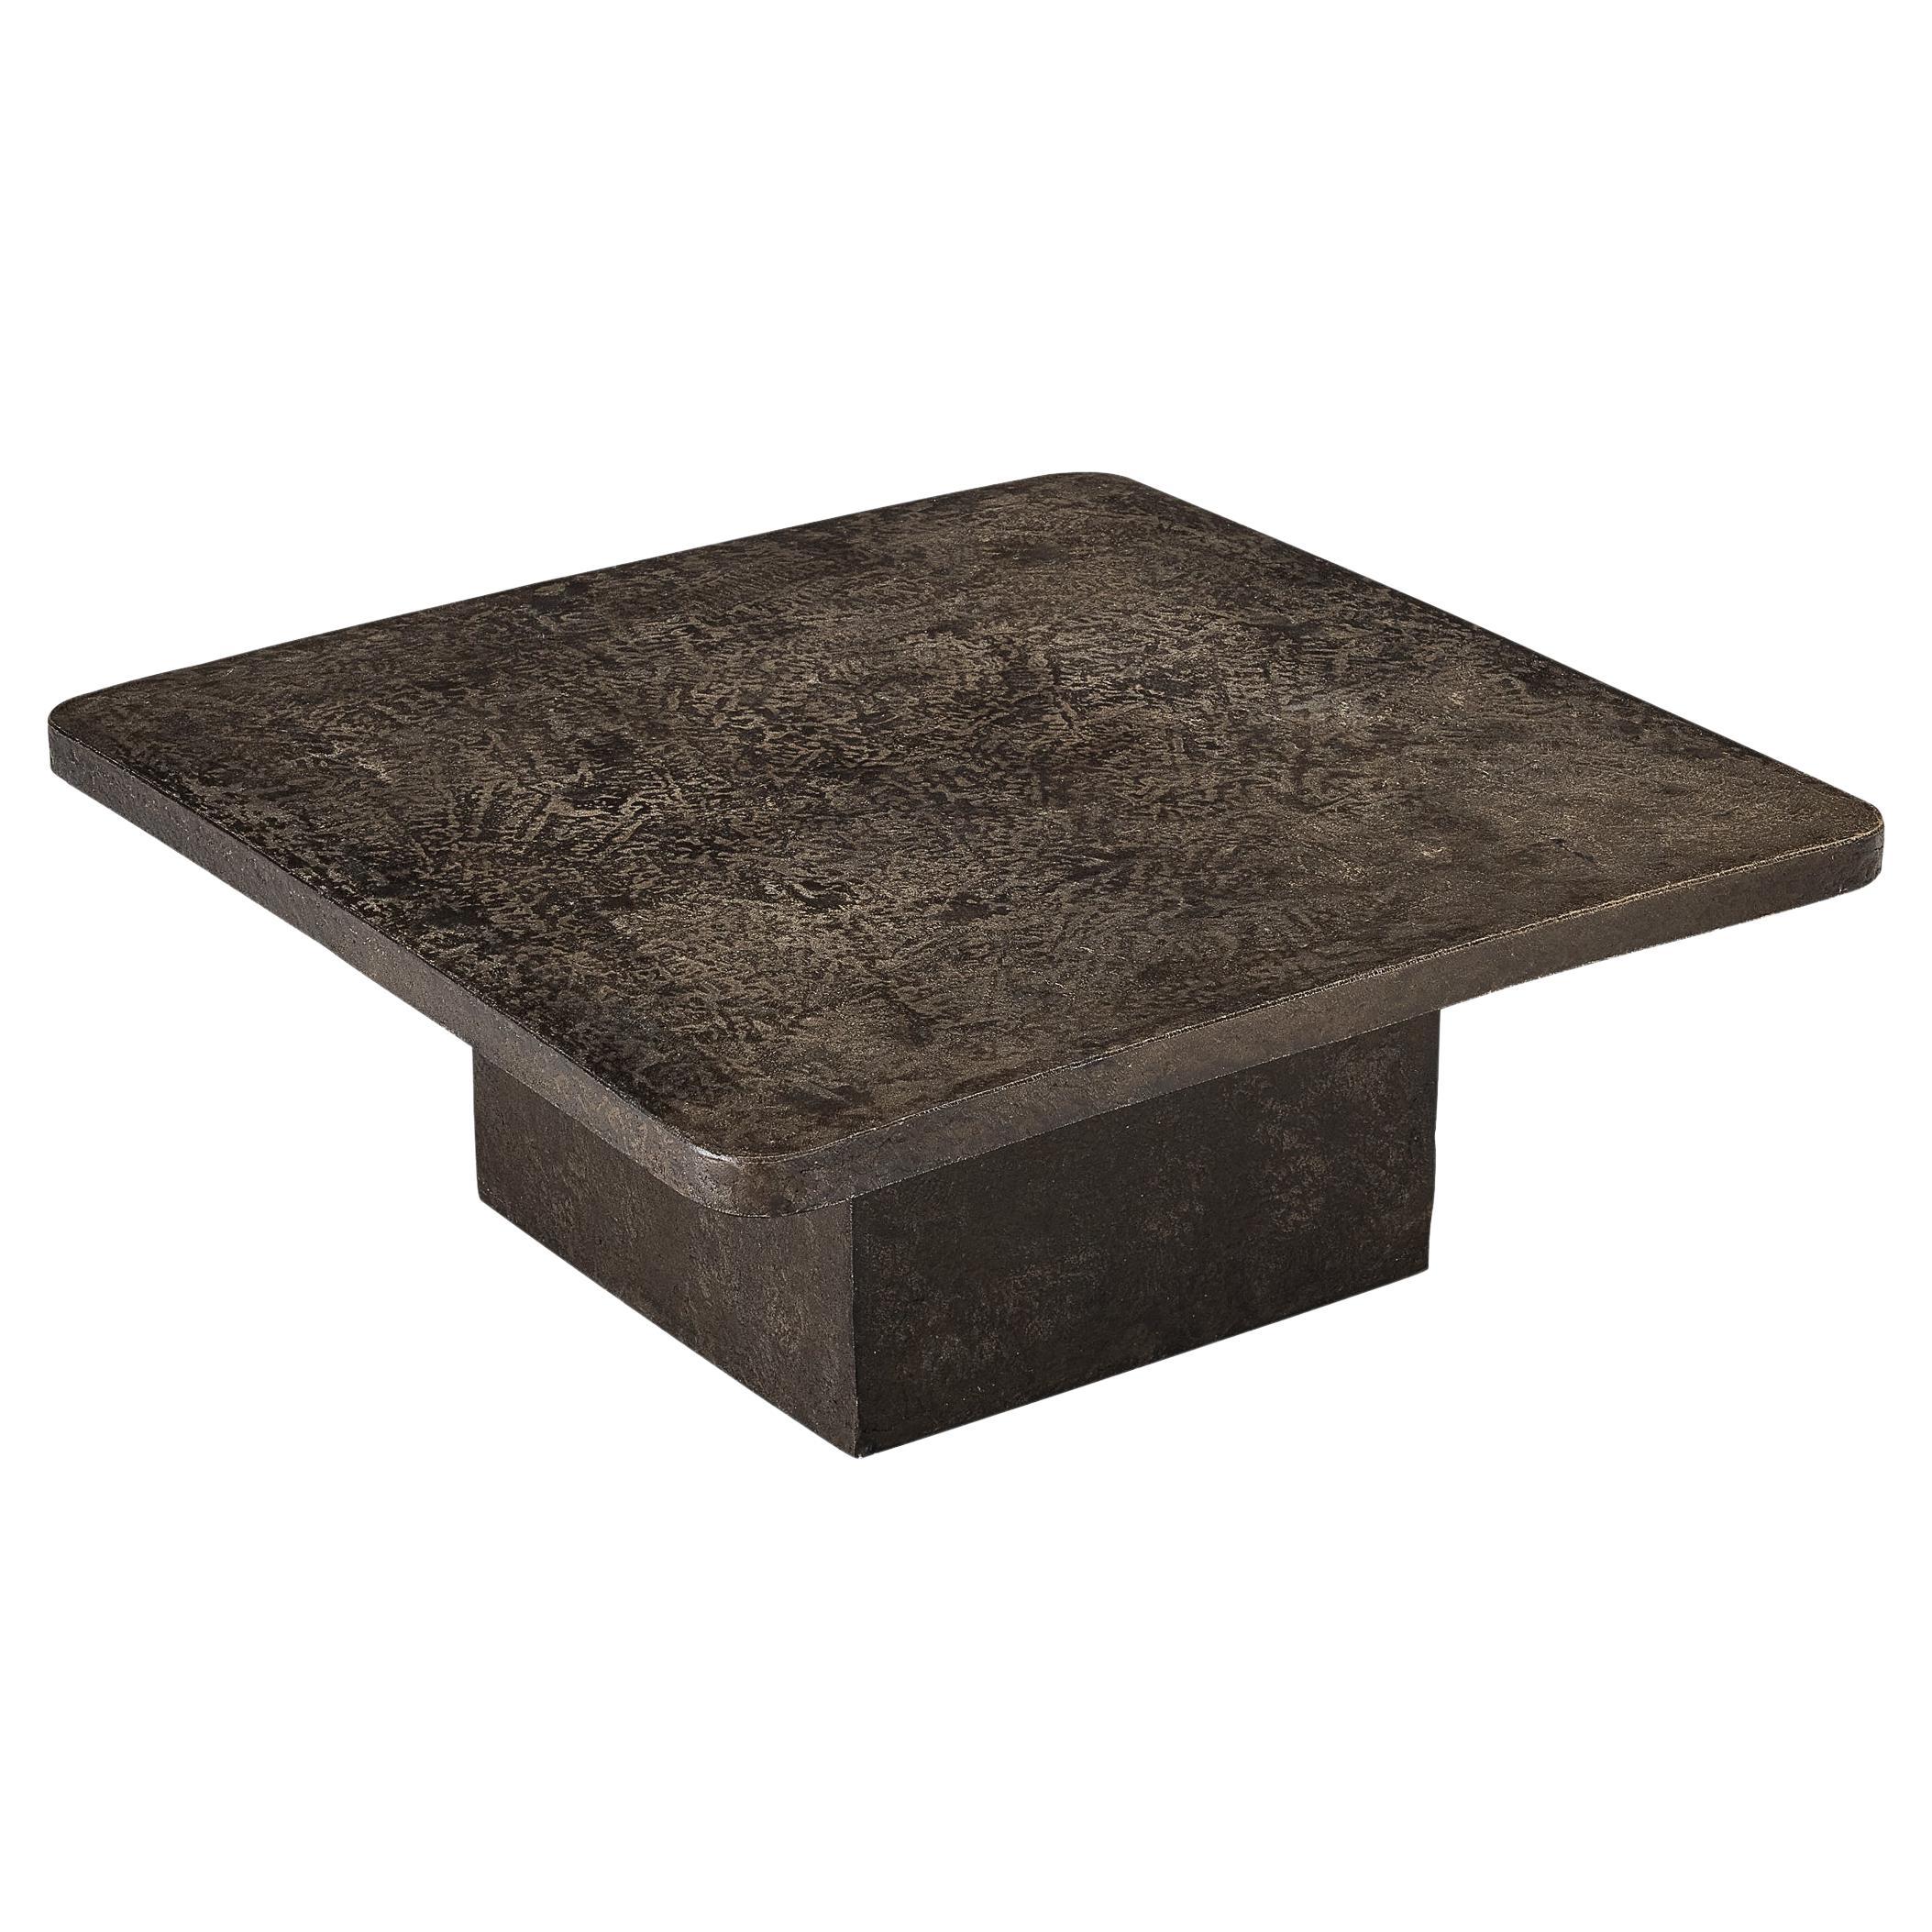 Brutalist Square Coffee Table in Textured Stone Look Resin  For Sale